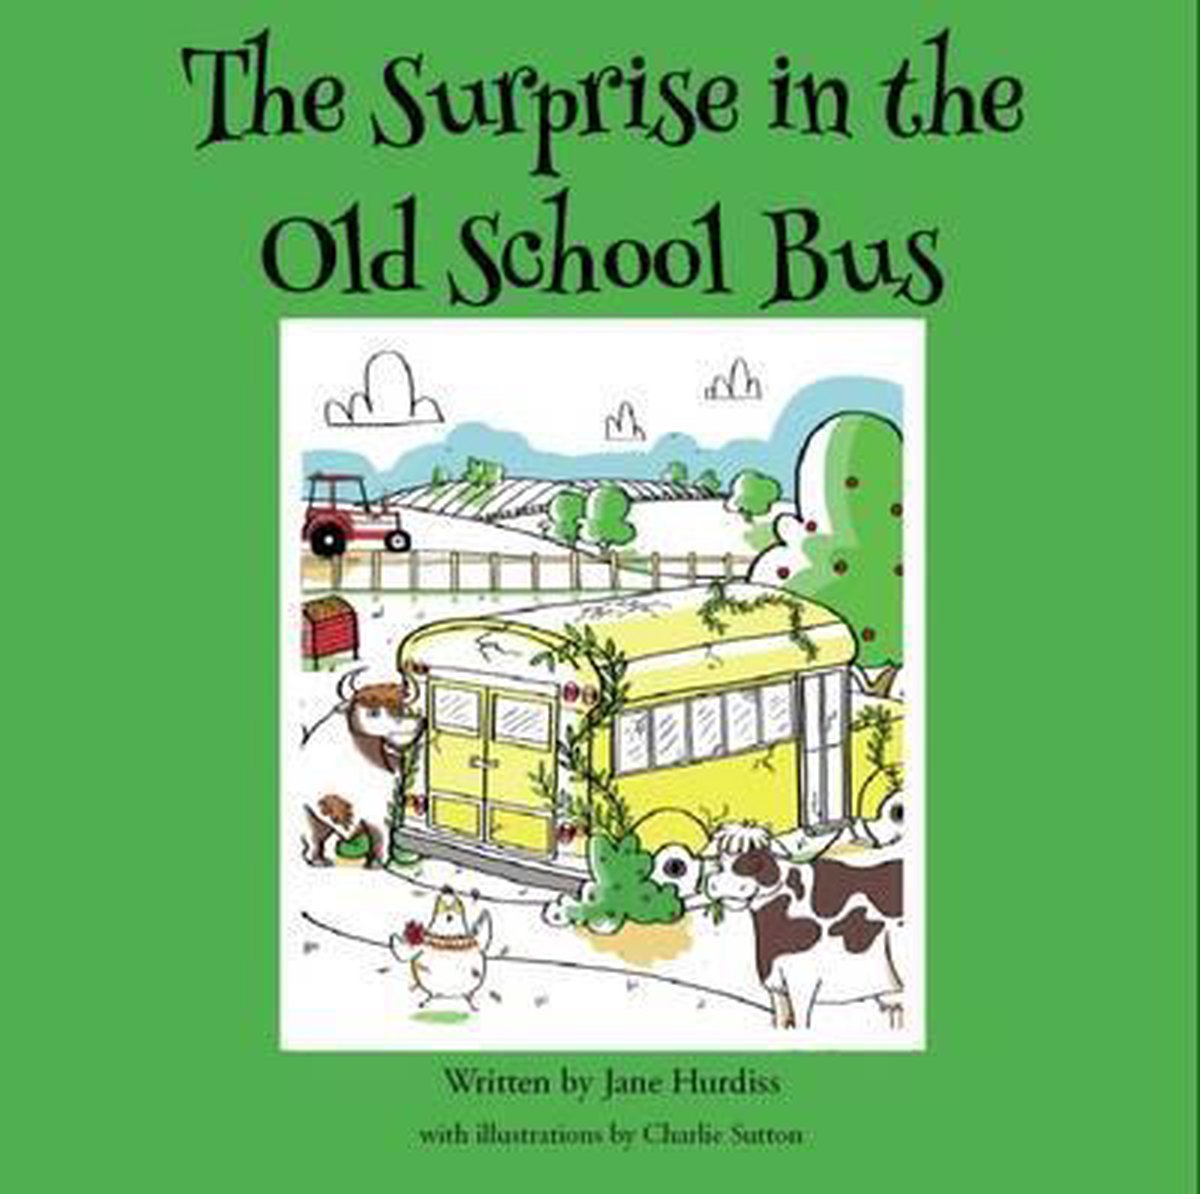 The Surprise in the Old School Bus - Jane Hurdiss